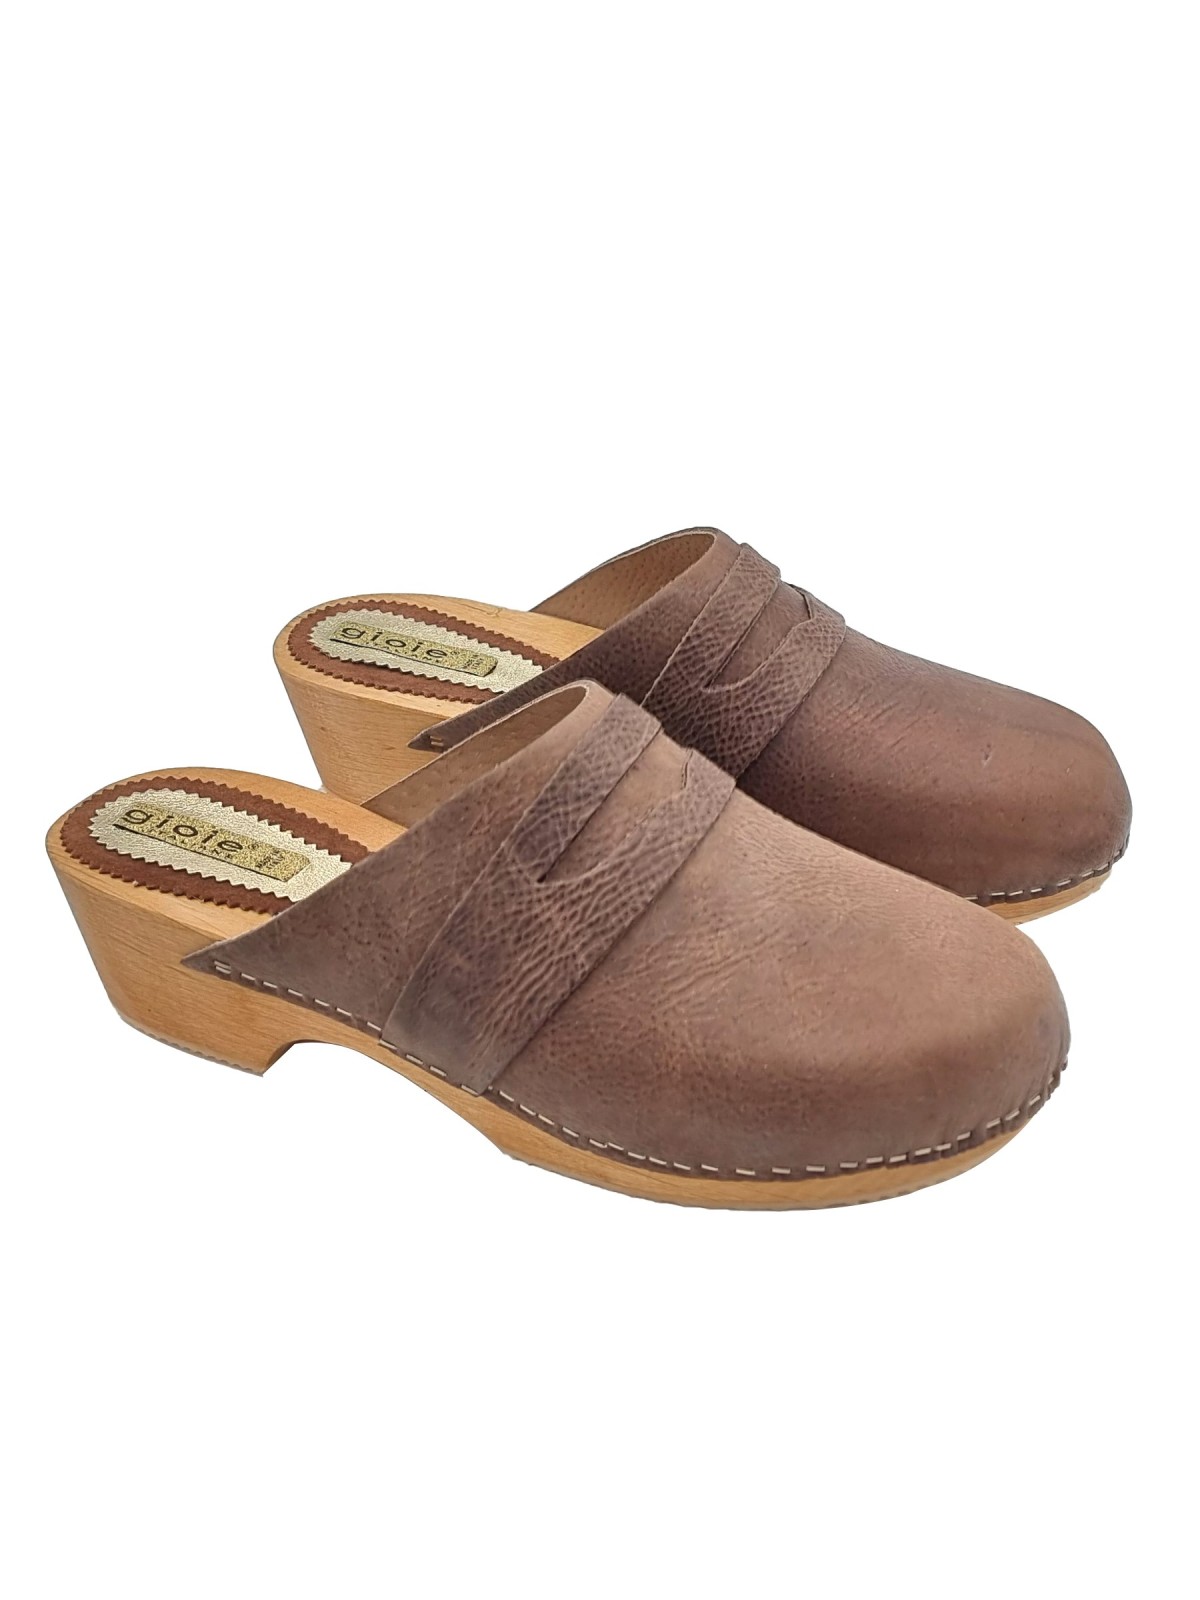 CLOGS IN BROWN LEATHER WITH HEEL 5